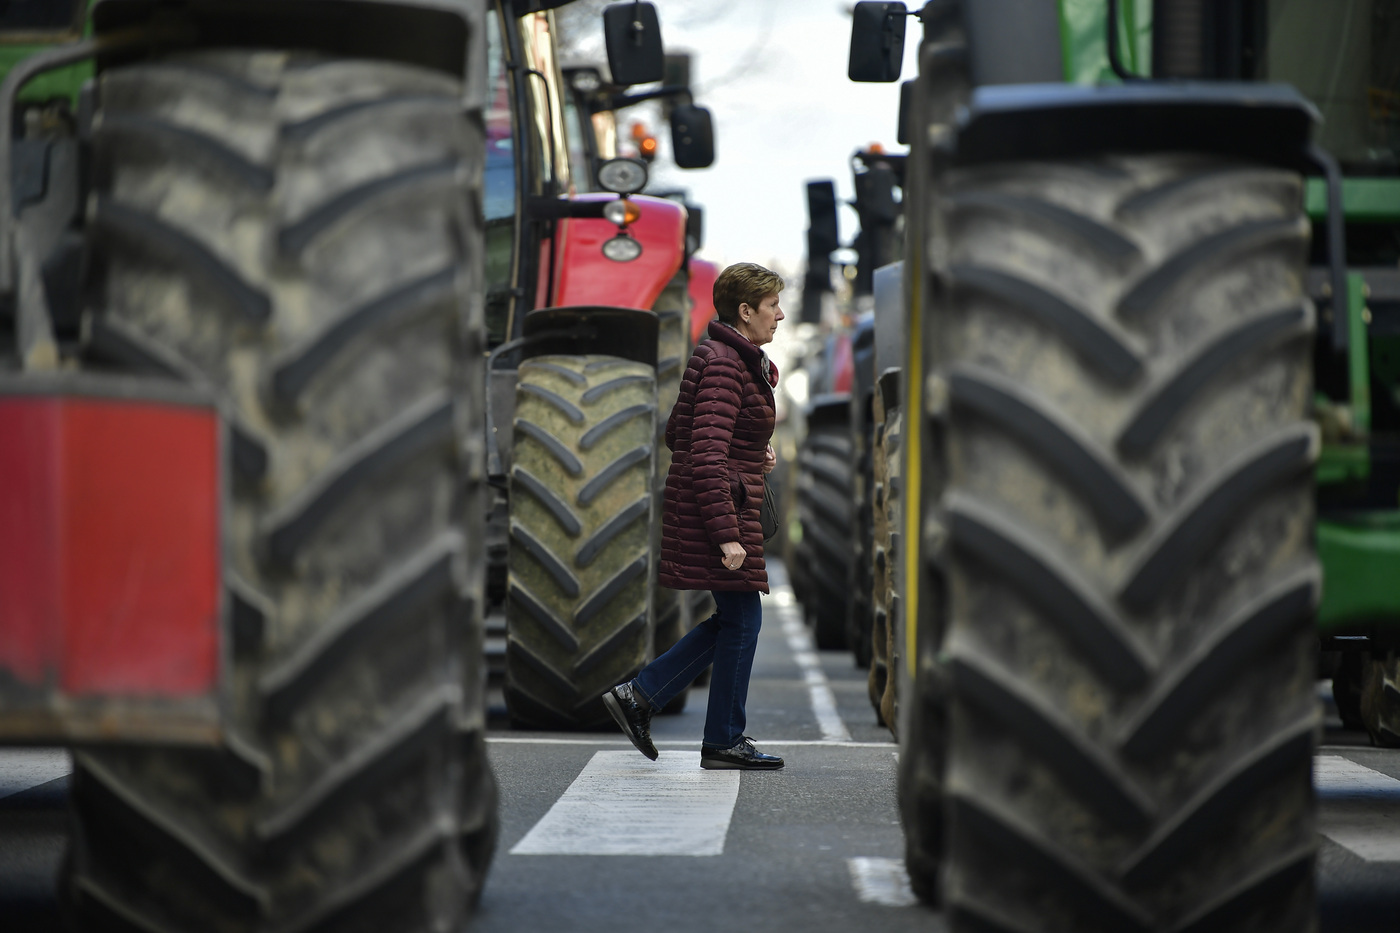 A pedestrian crosses a street as farmers block the center of the city with their tractors during a protest in Pamplona, northern Spain, Wednesday, Feb. 19, 2020. Farmers across Spain are taking part in mass protests over what they say are plummeting incomes for agricultural workers. (AP Photo/Alvaro Barrientos)